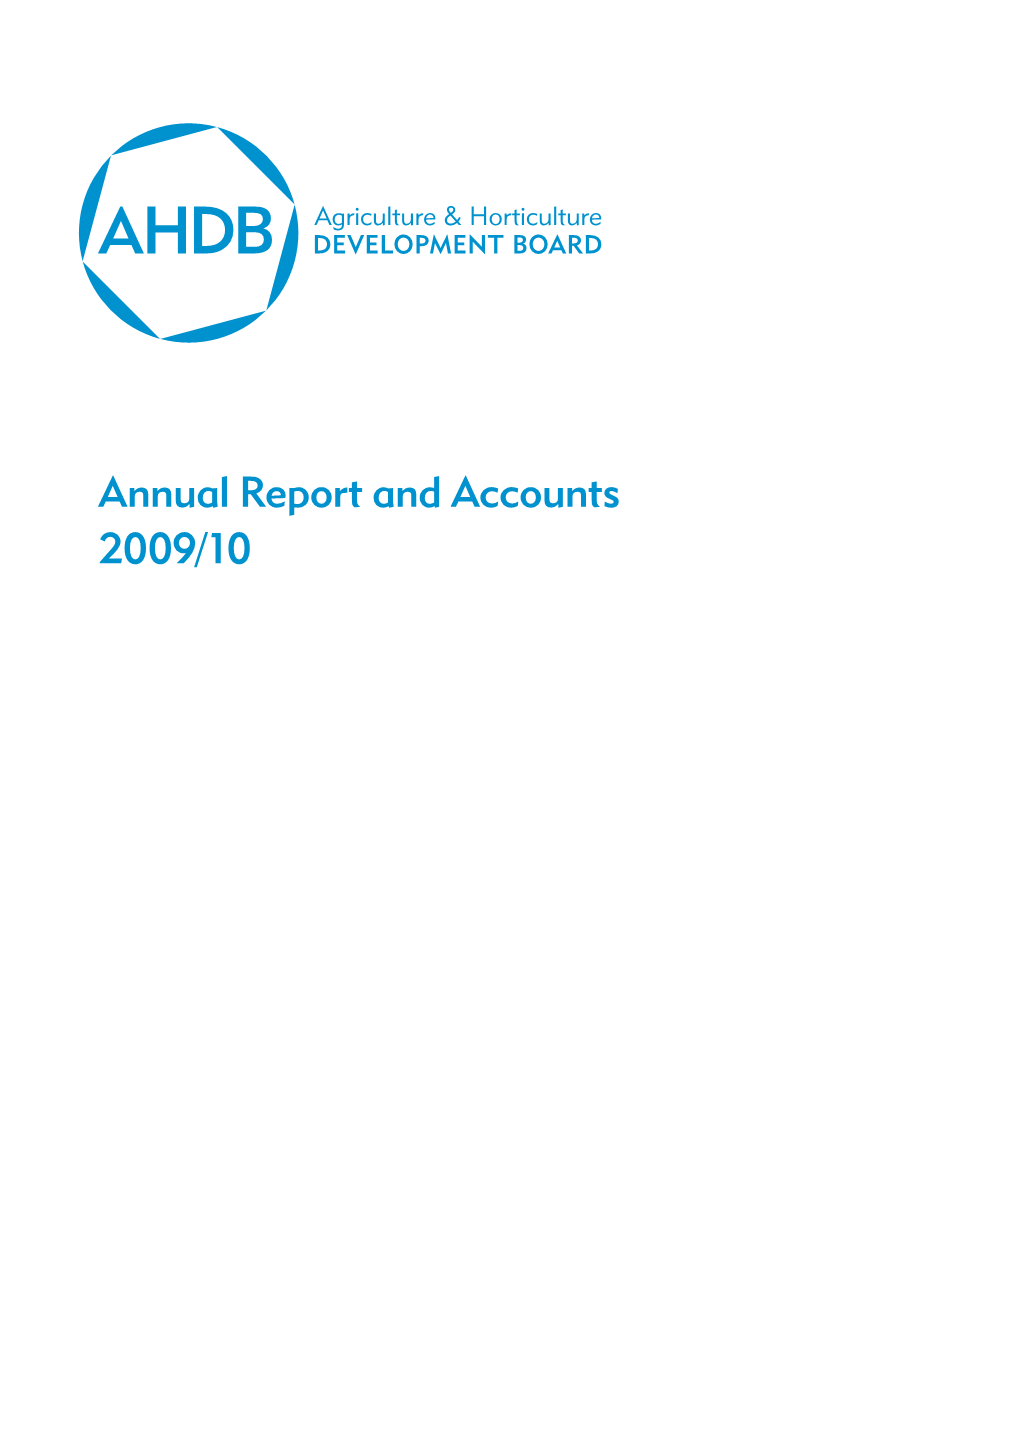 Annual Report and Accounts 2009/10